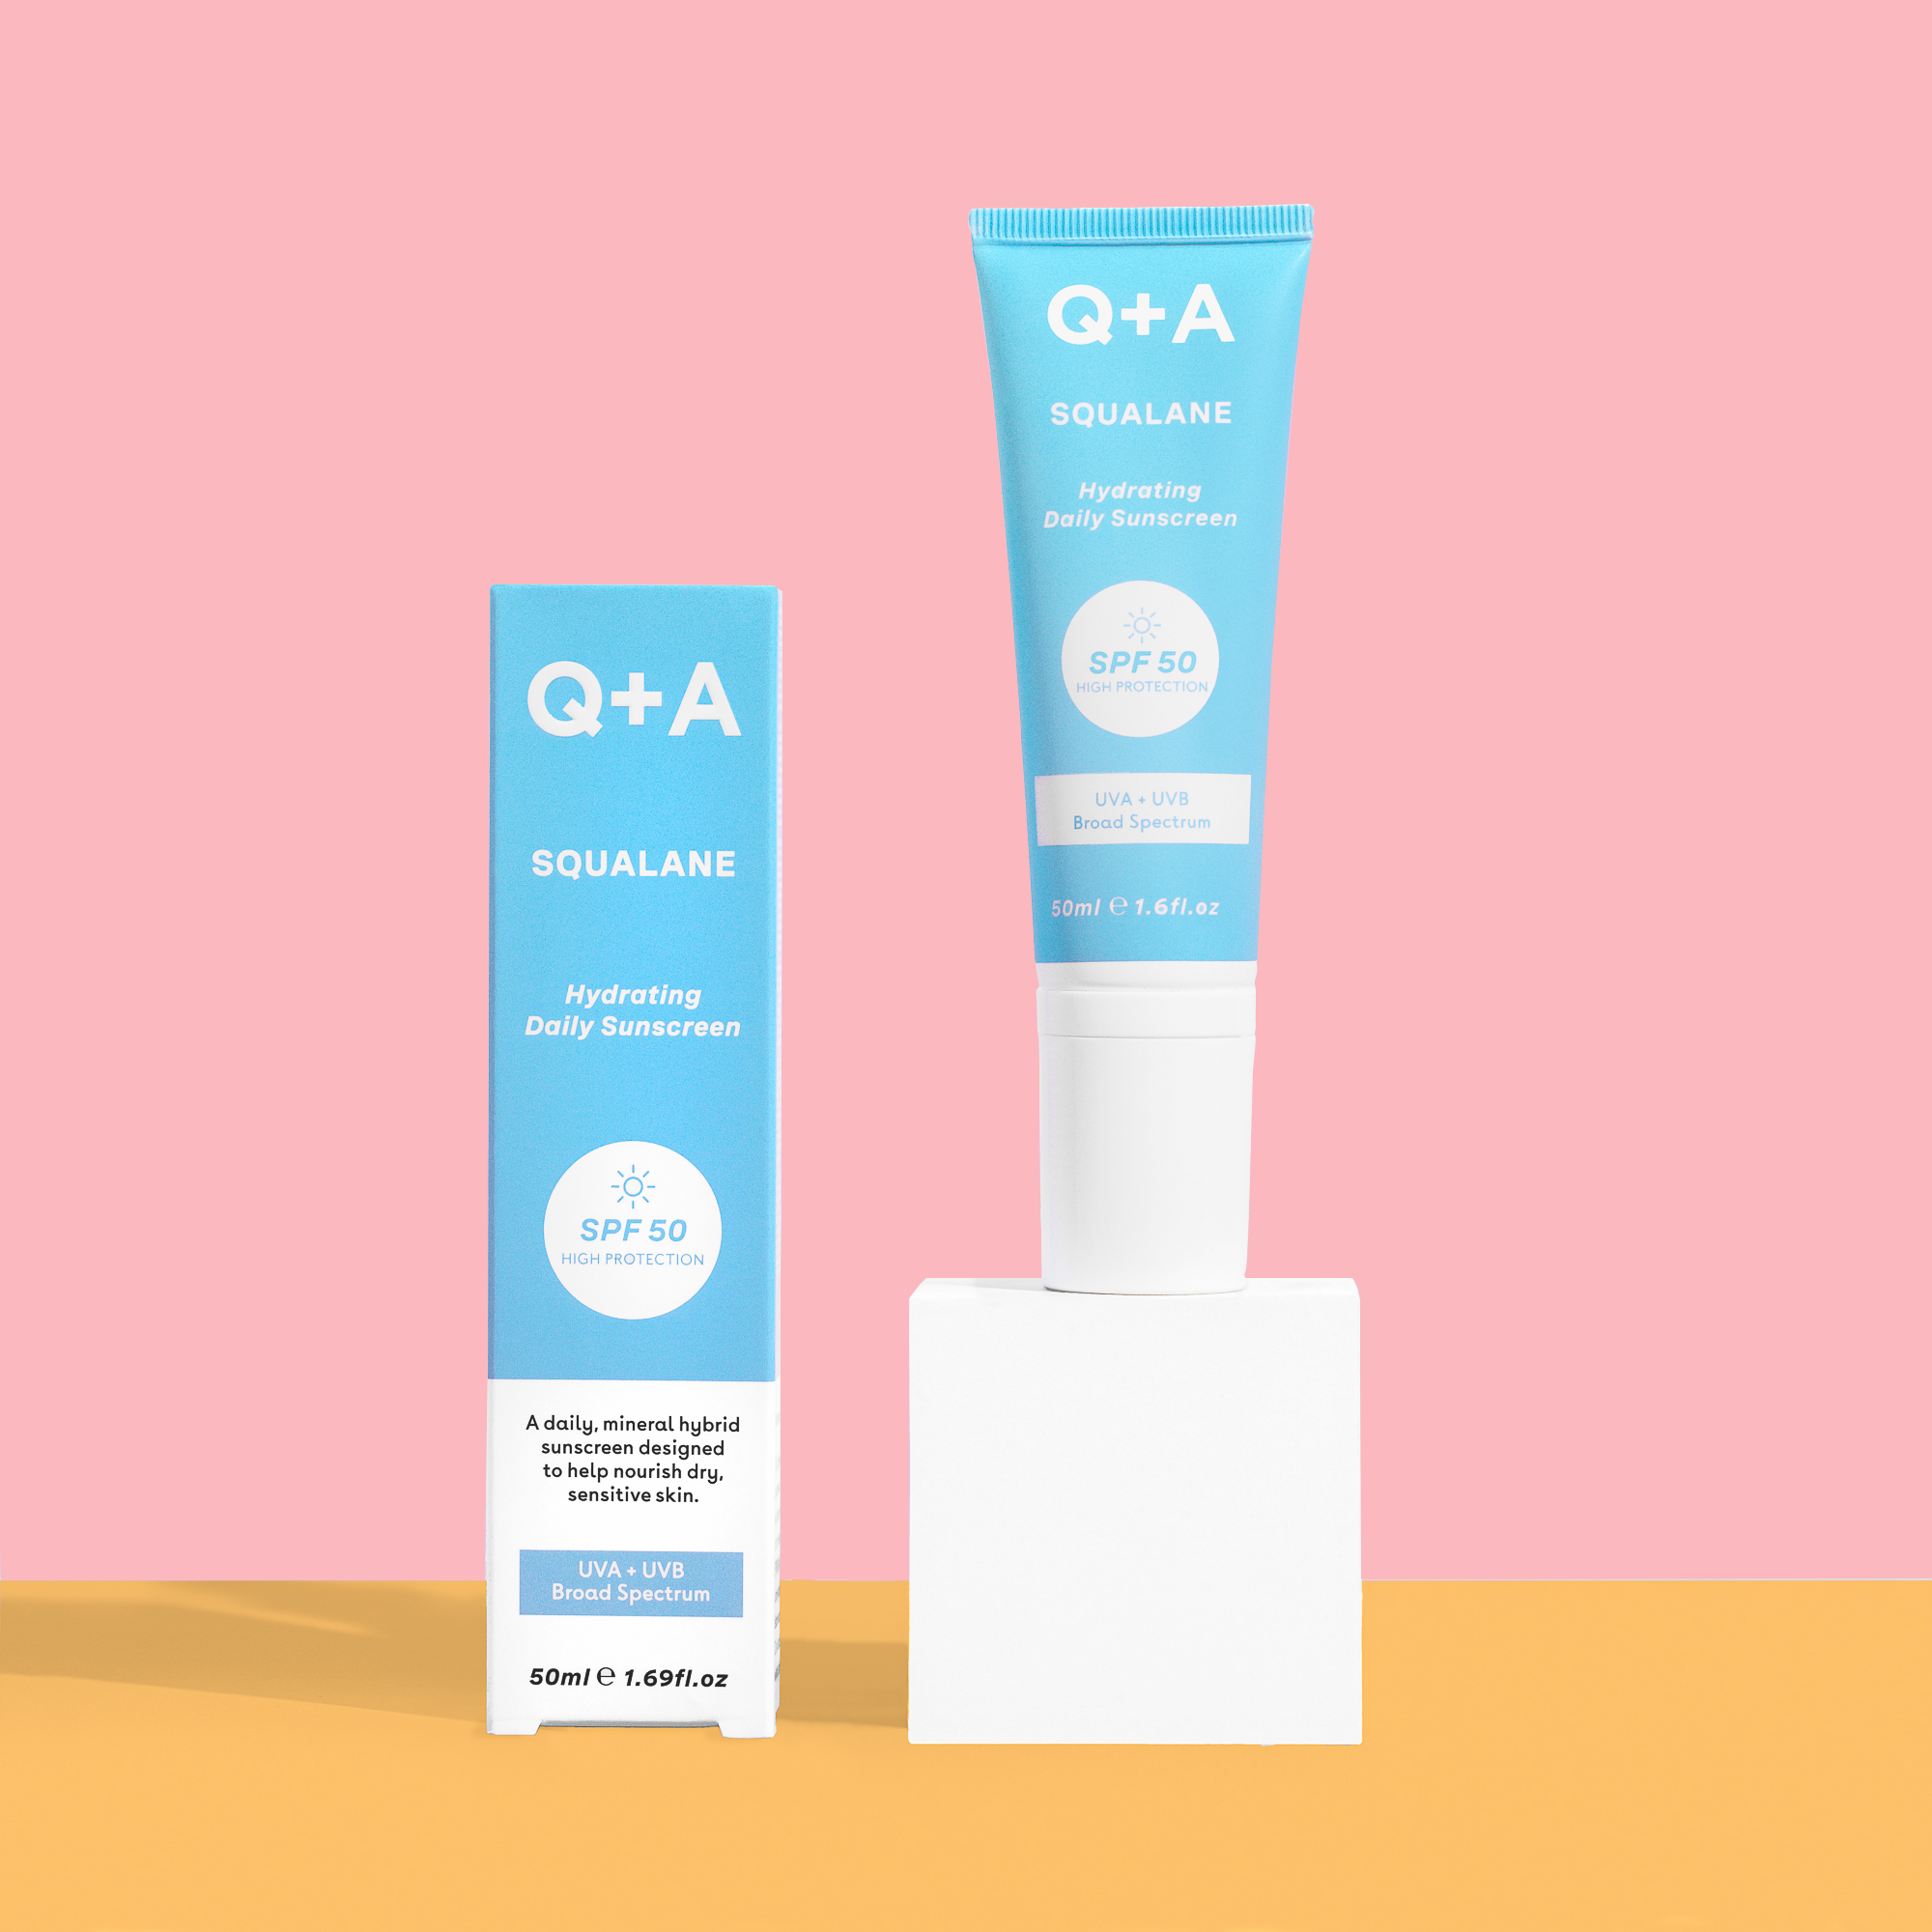 Q+A Squalane Hydrating Daily Sunscreen SPF 50